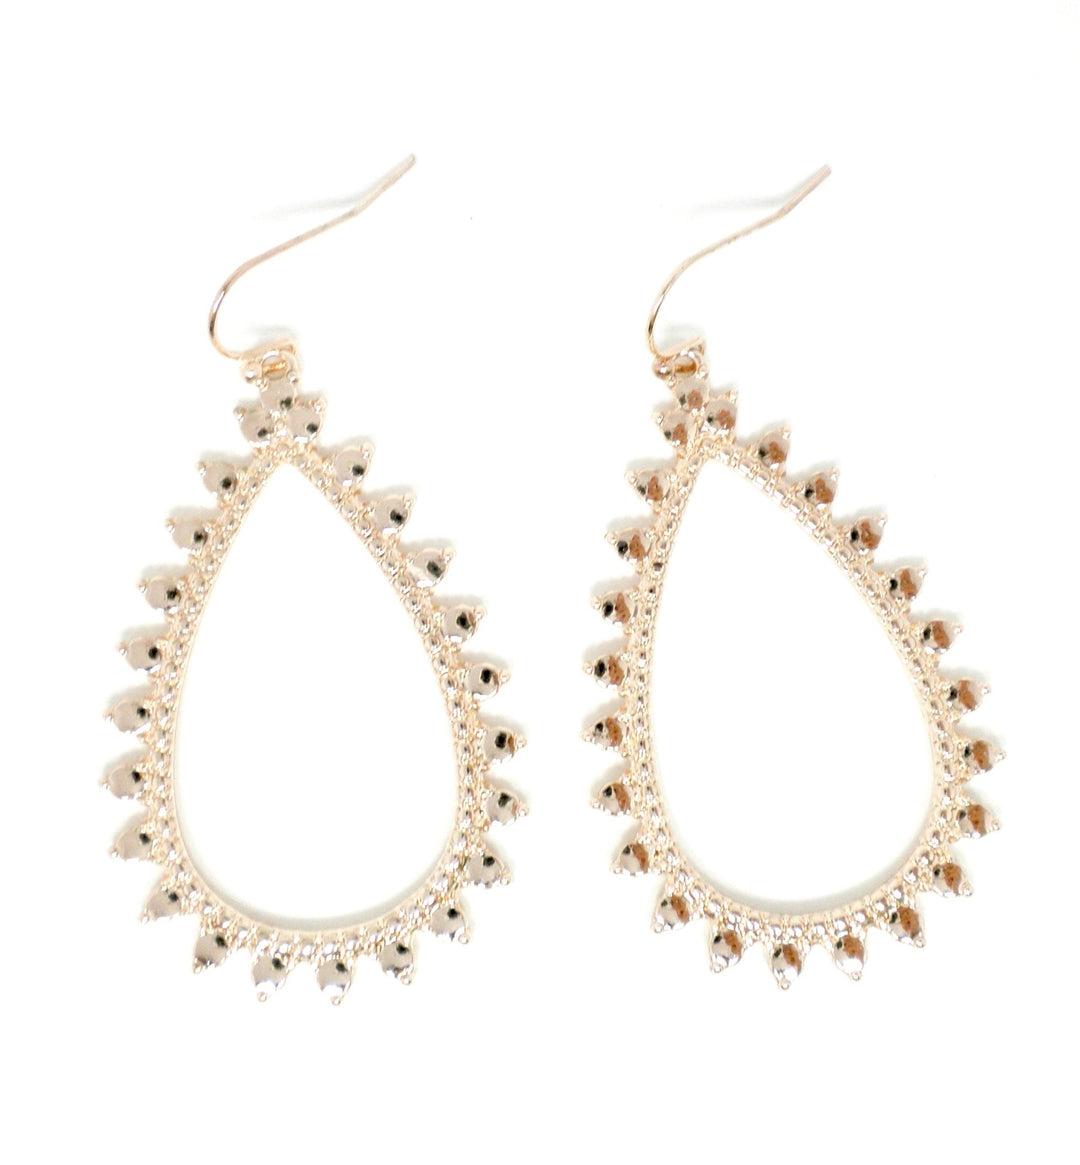 Stella & Ruby Rose Gold Teardrop Earrings - Donated From The Designer - The Fashion Foundation